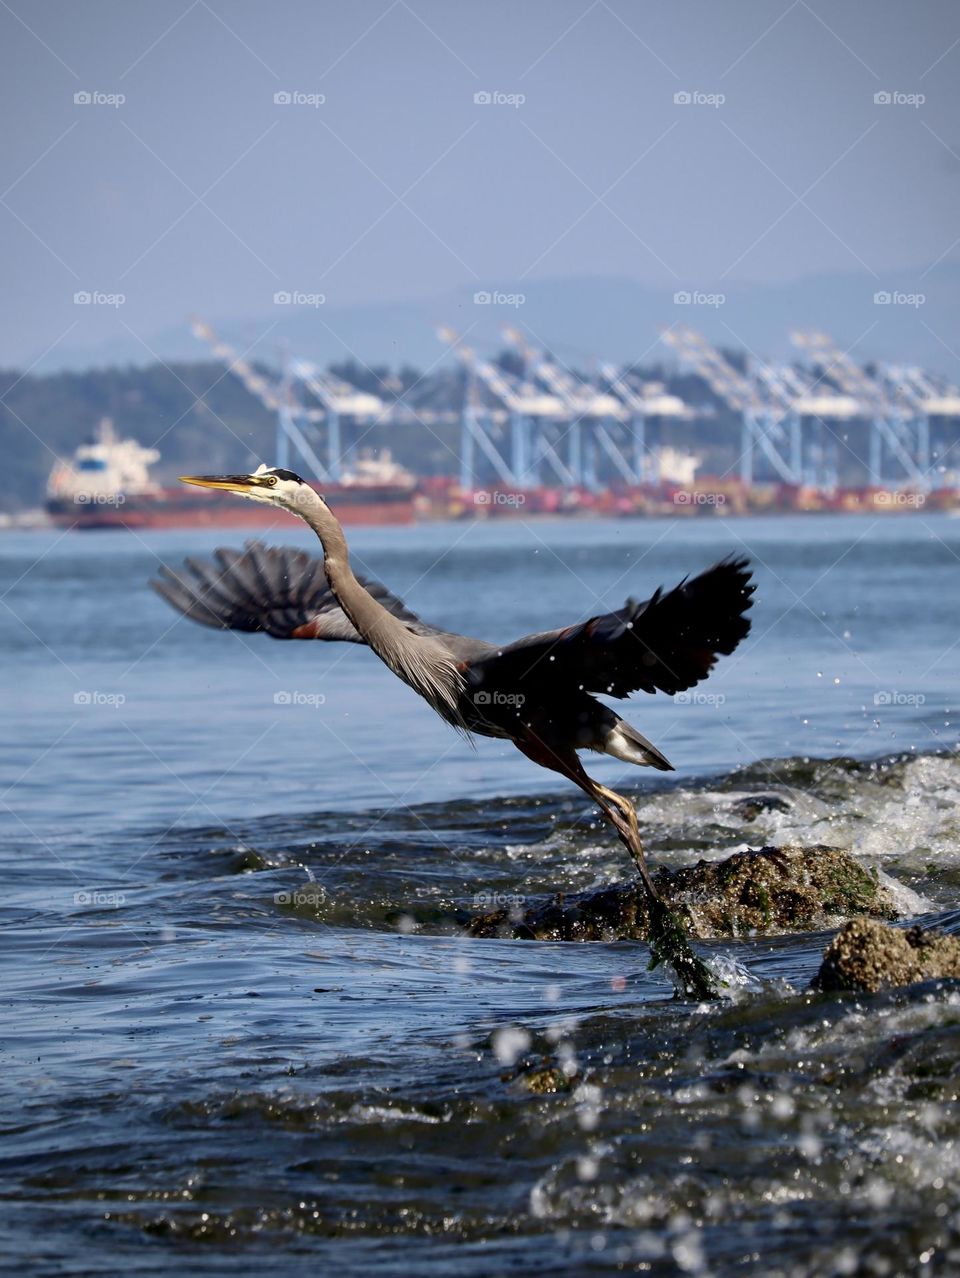 As it takes flight from the waters edge, the great blue heron spreads its wings along Commencement Bay in Tacoma, Washington 